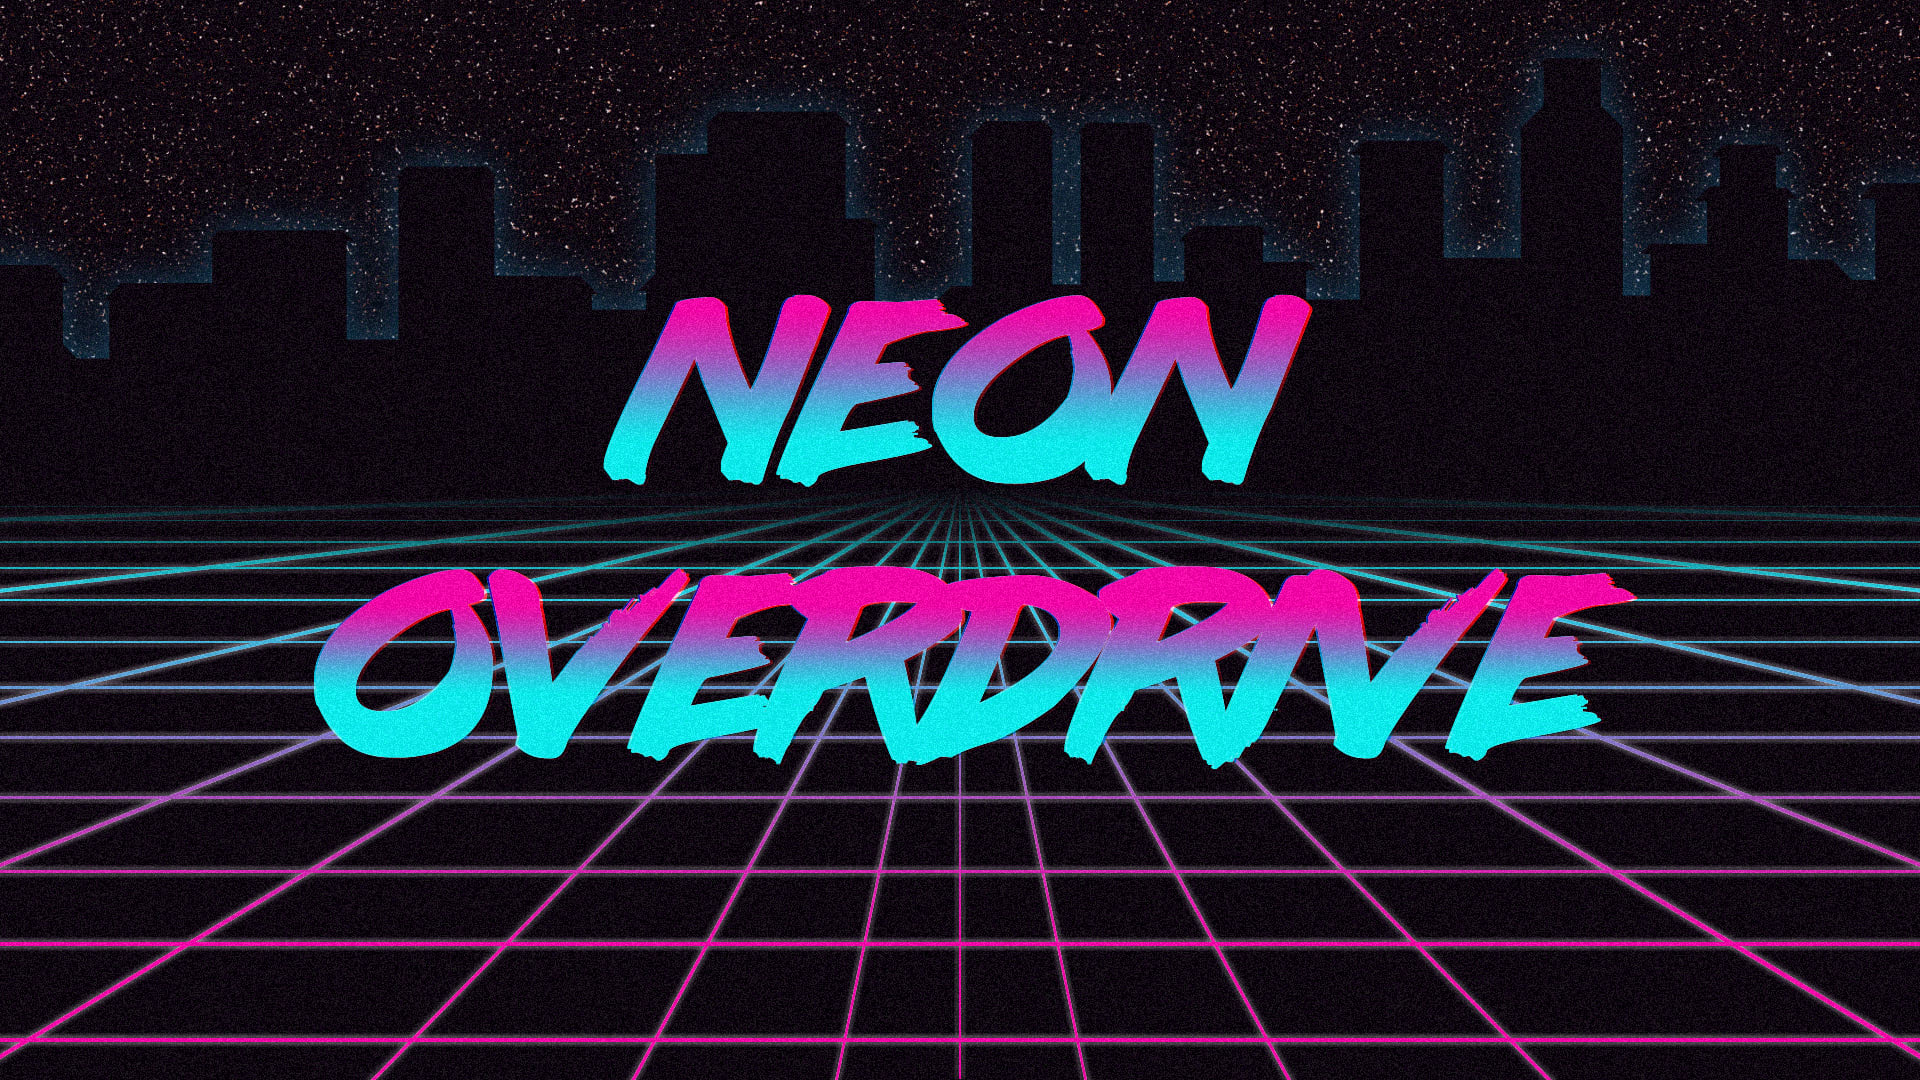 I Will Create An 80s Retrowave Style Wallpaper - Graphic Design , HD Wallpaper & Backgrounds